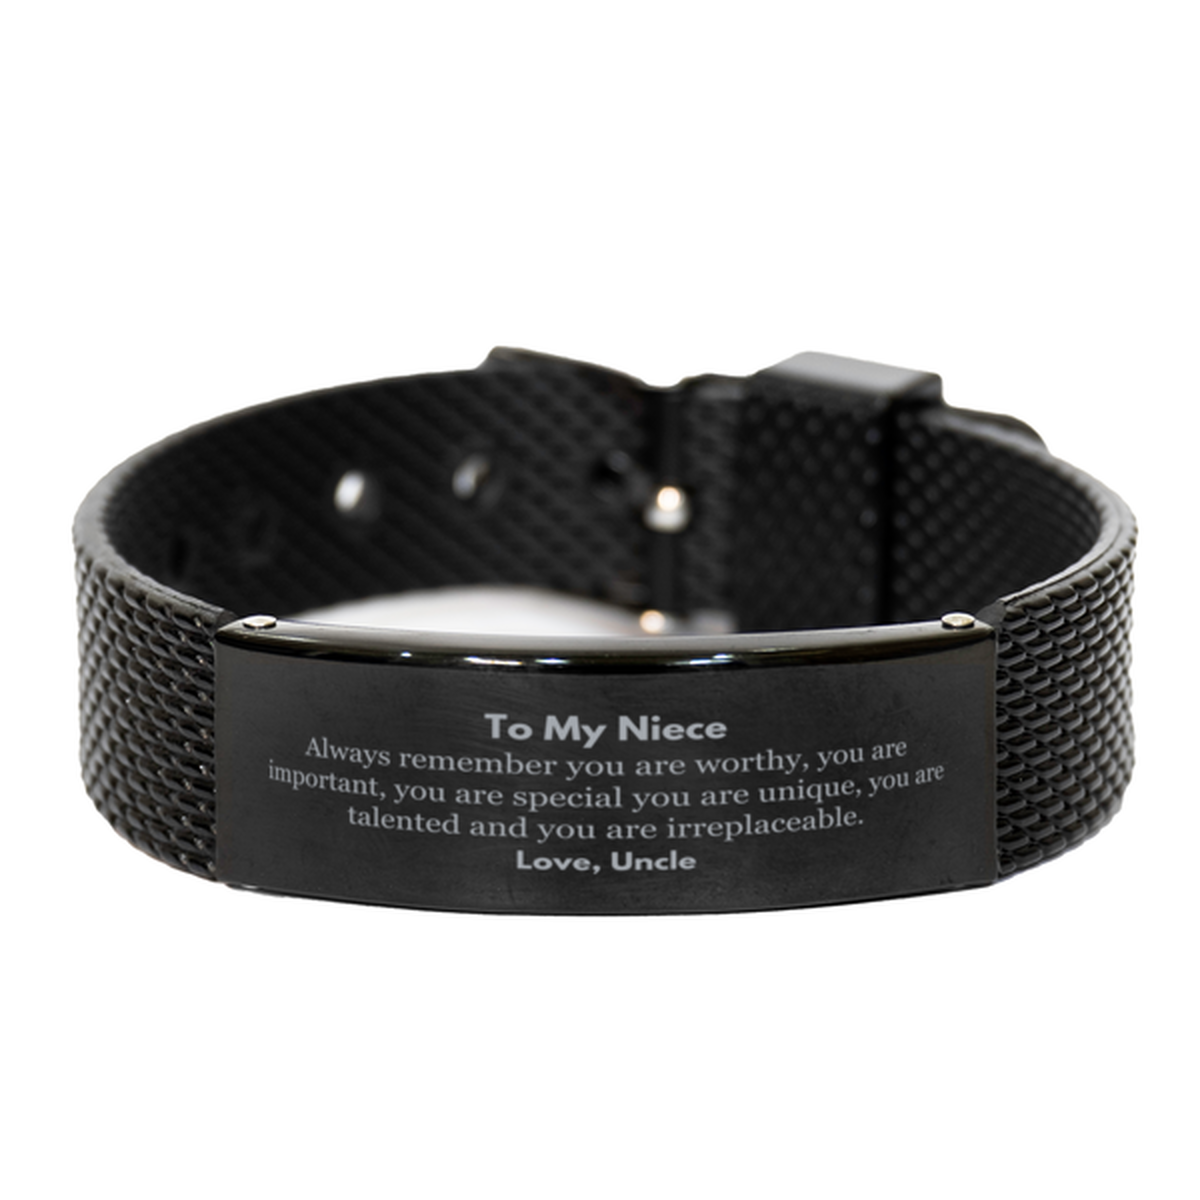 Niece Birthday Gifts from Uncle, Inspirational Black Shark Mesh Bracelet for Niece Christmas Graduation Gifts for Niece Always remember you are worthy, you are important. Love, Uncle